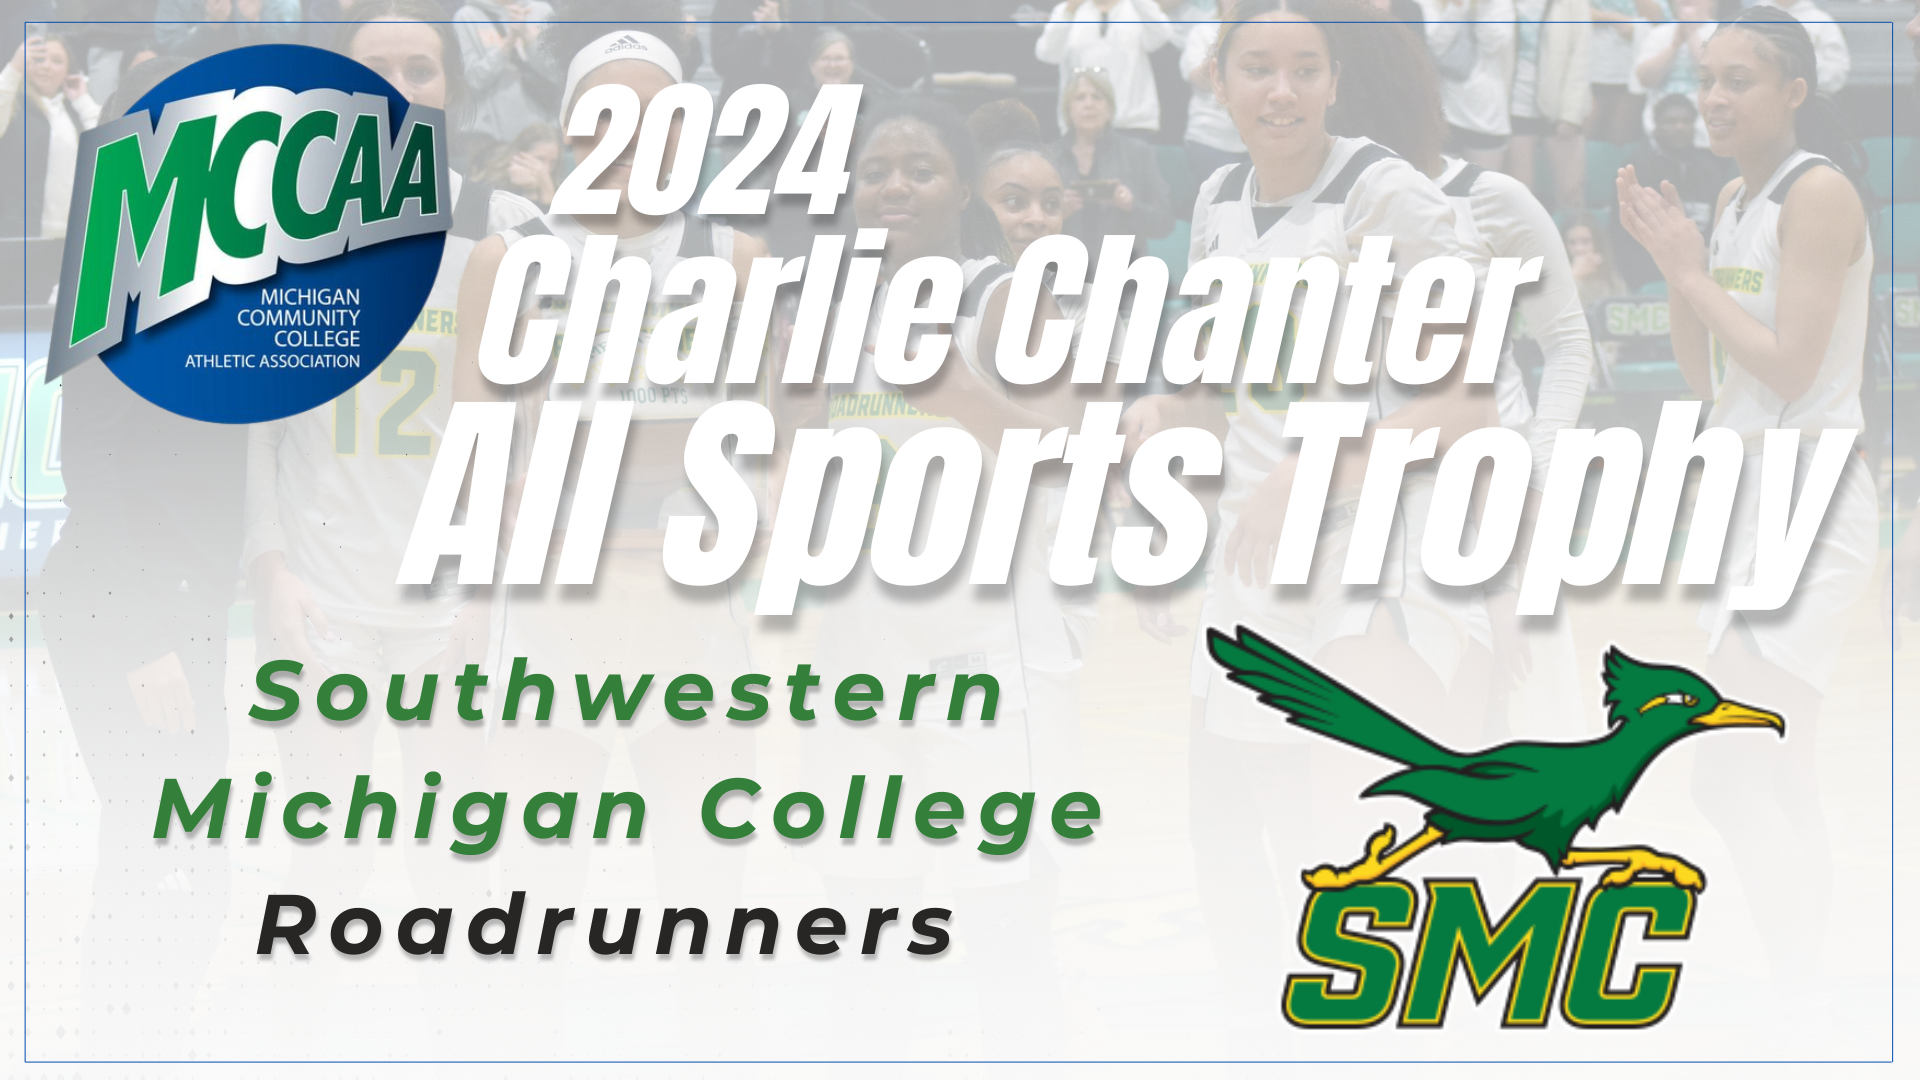 Southwestern Michigan College Claims 2023-24 Charlie Chanter All-Sports Trophy